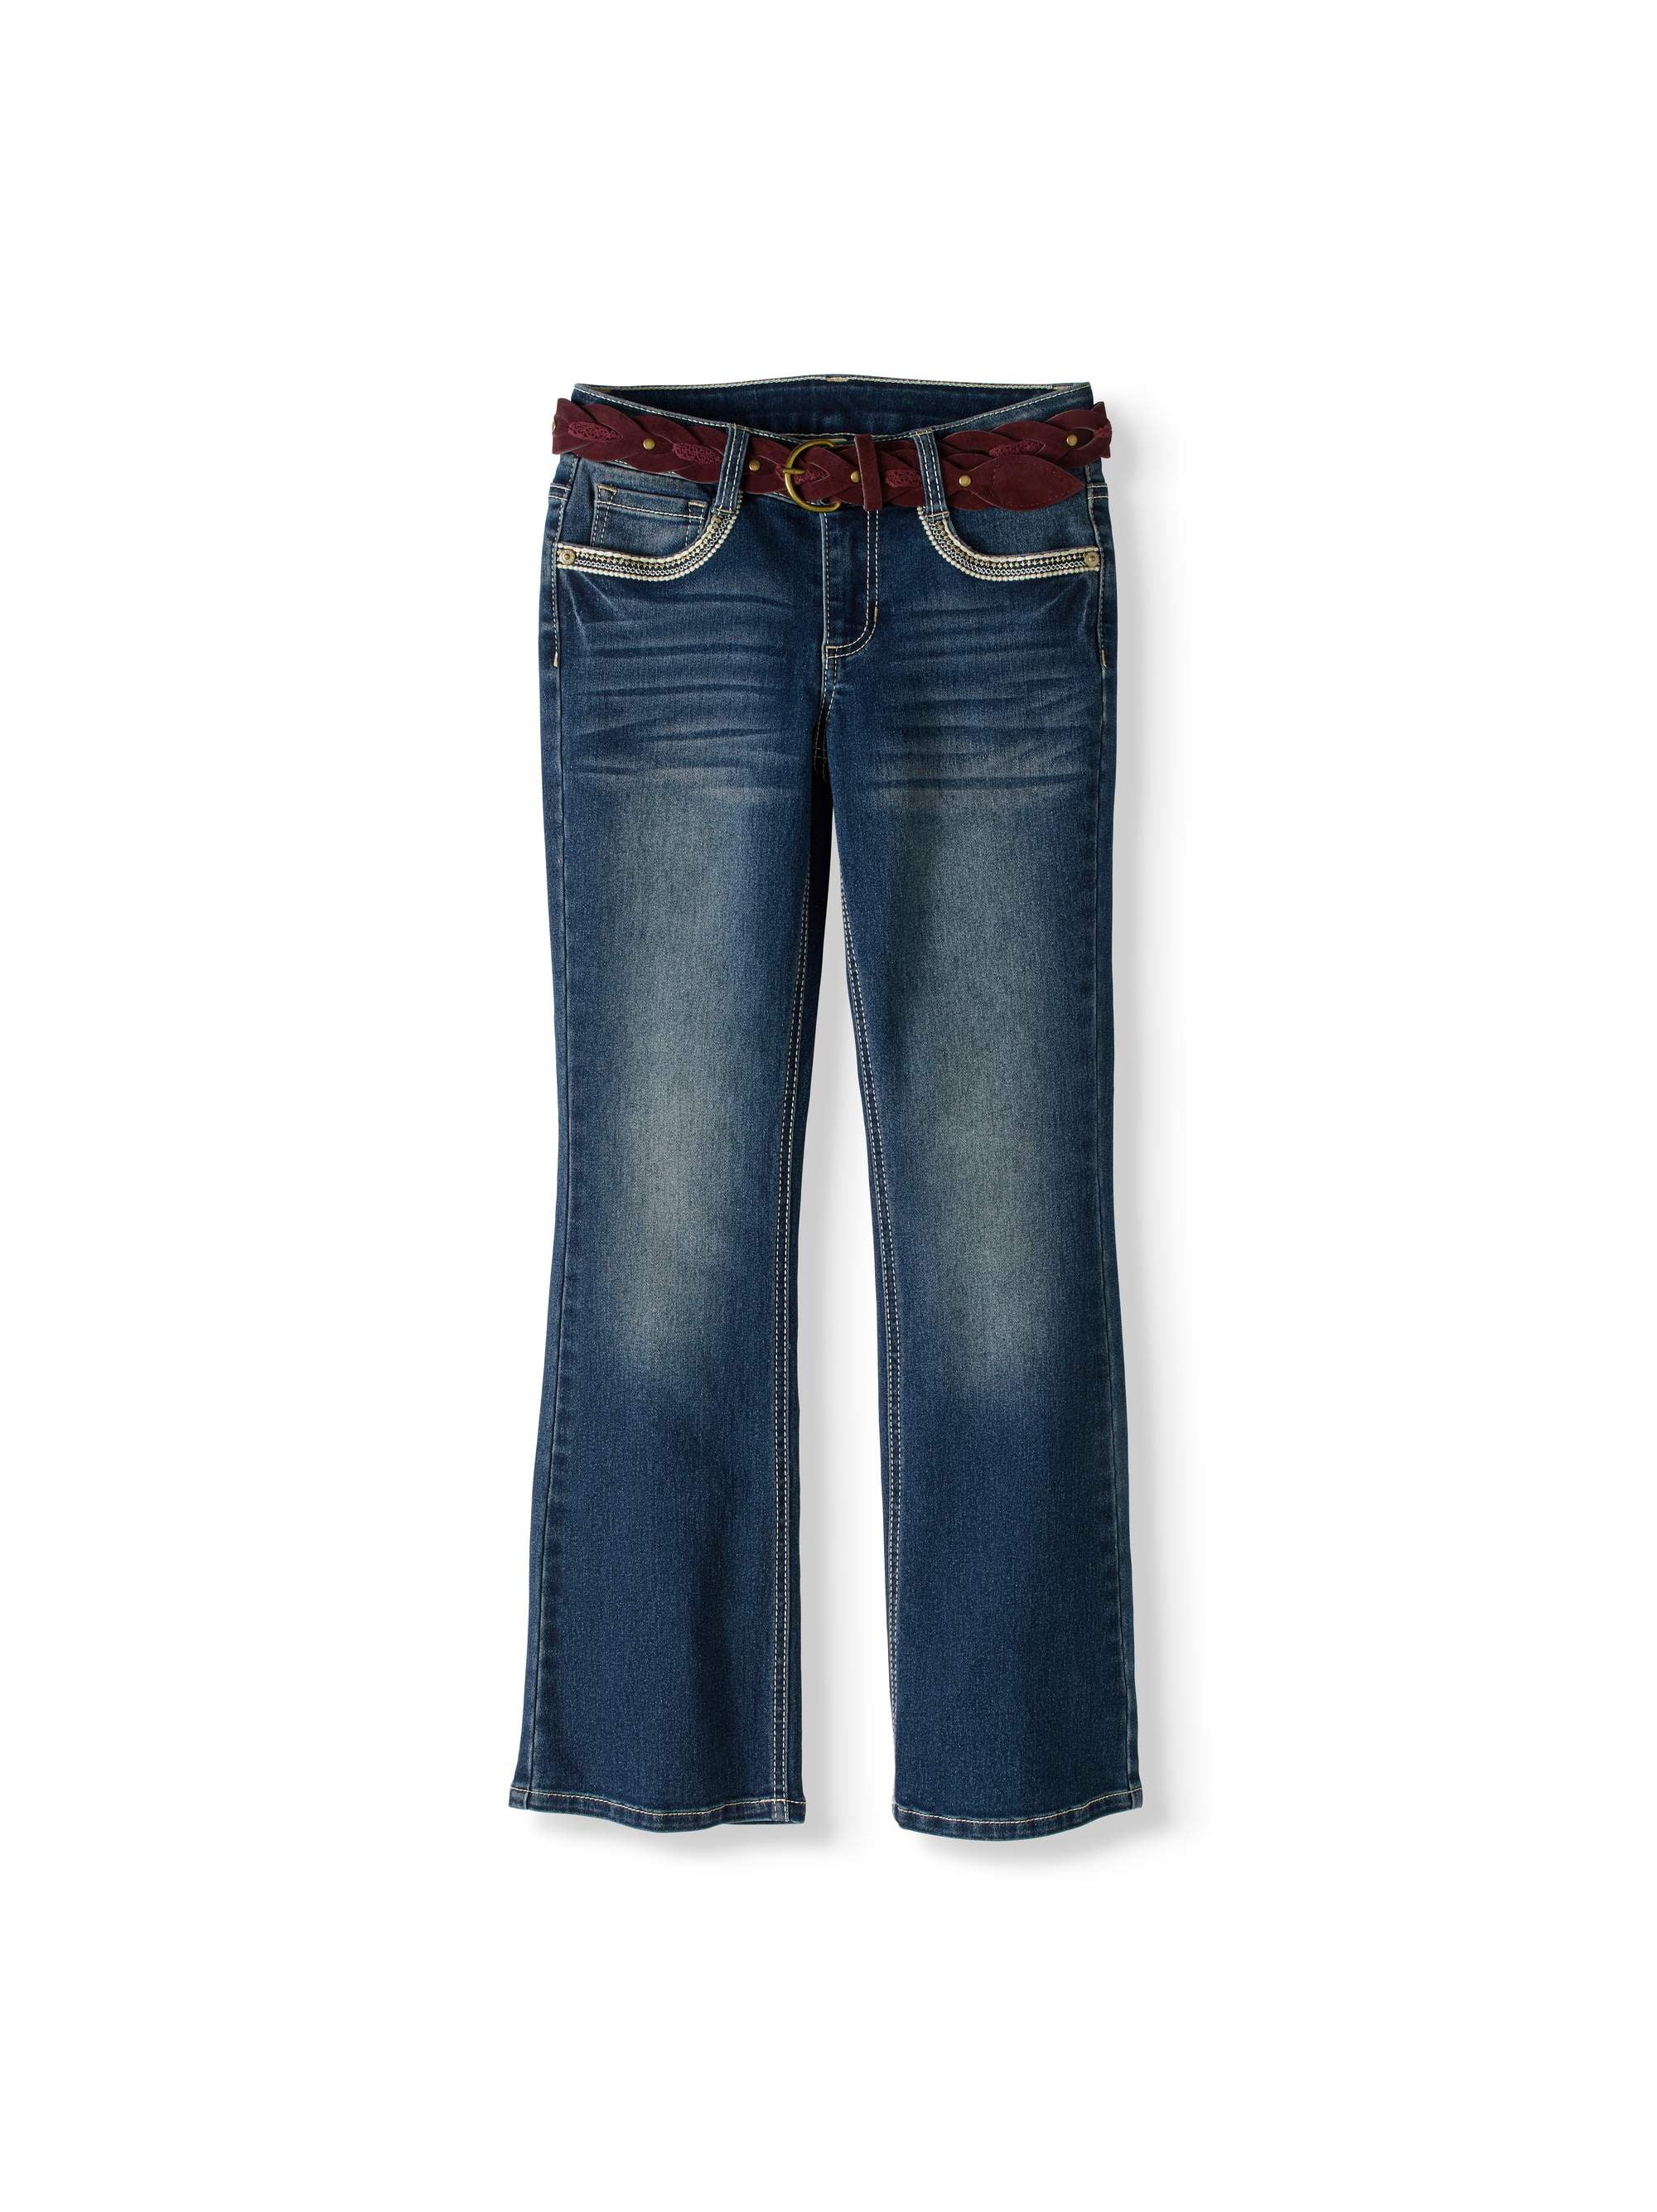 faded glory ultimate boot cut jeans